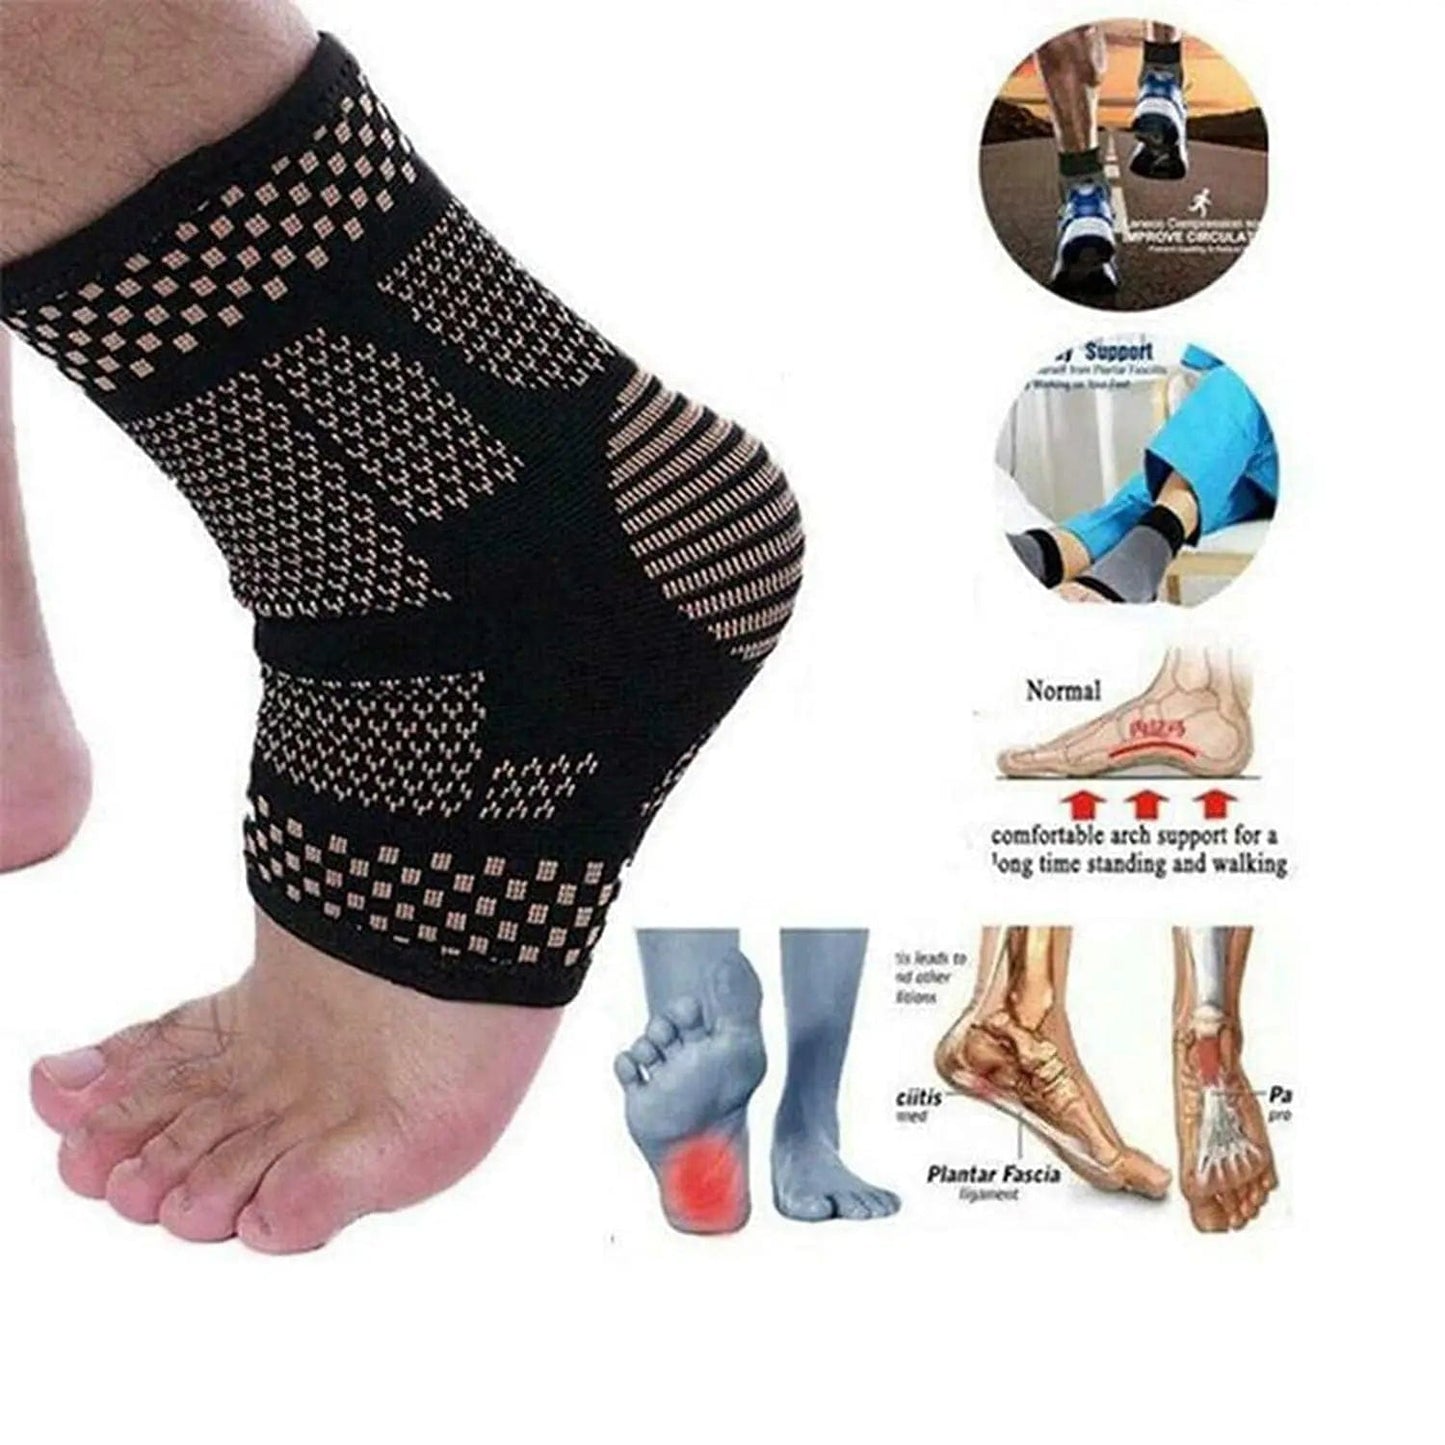 Foot Angel Anti Fatigue Outdoor Compression Anklet Socks - Support and Comfort